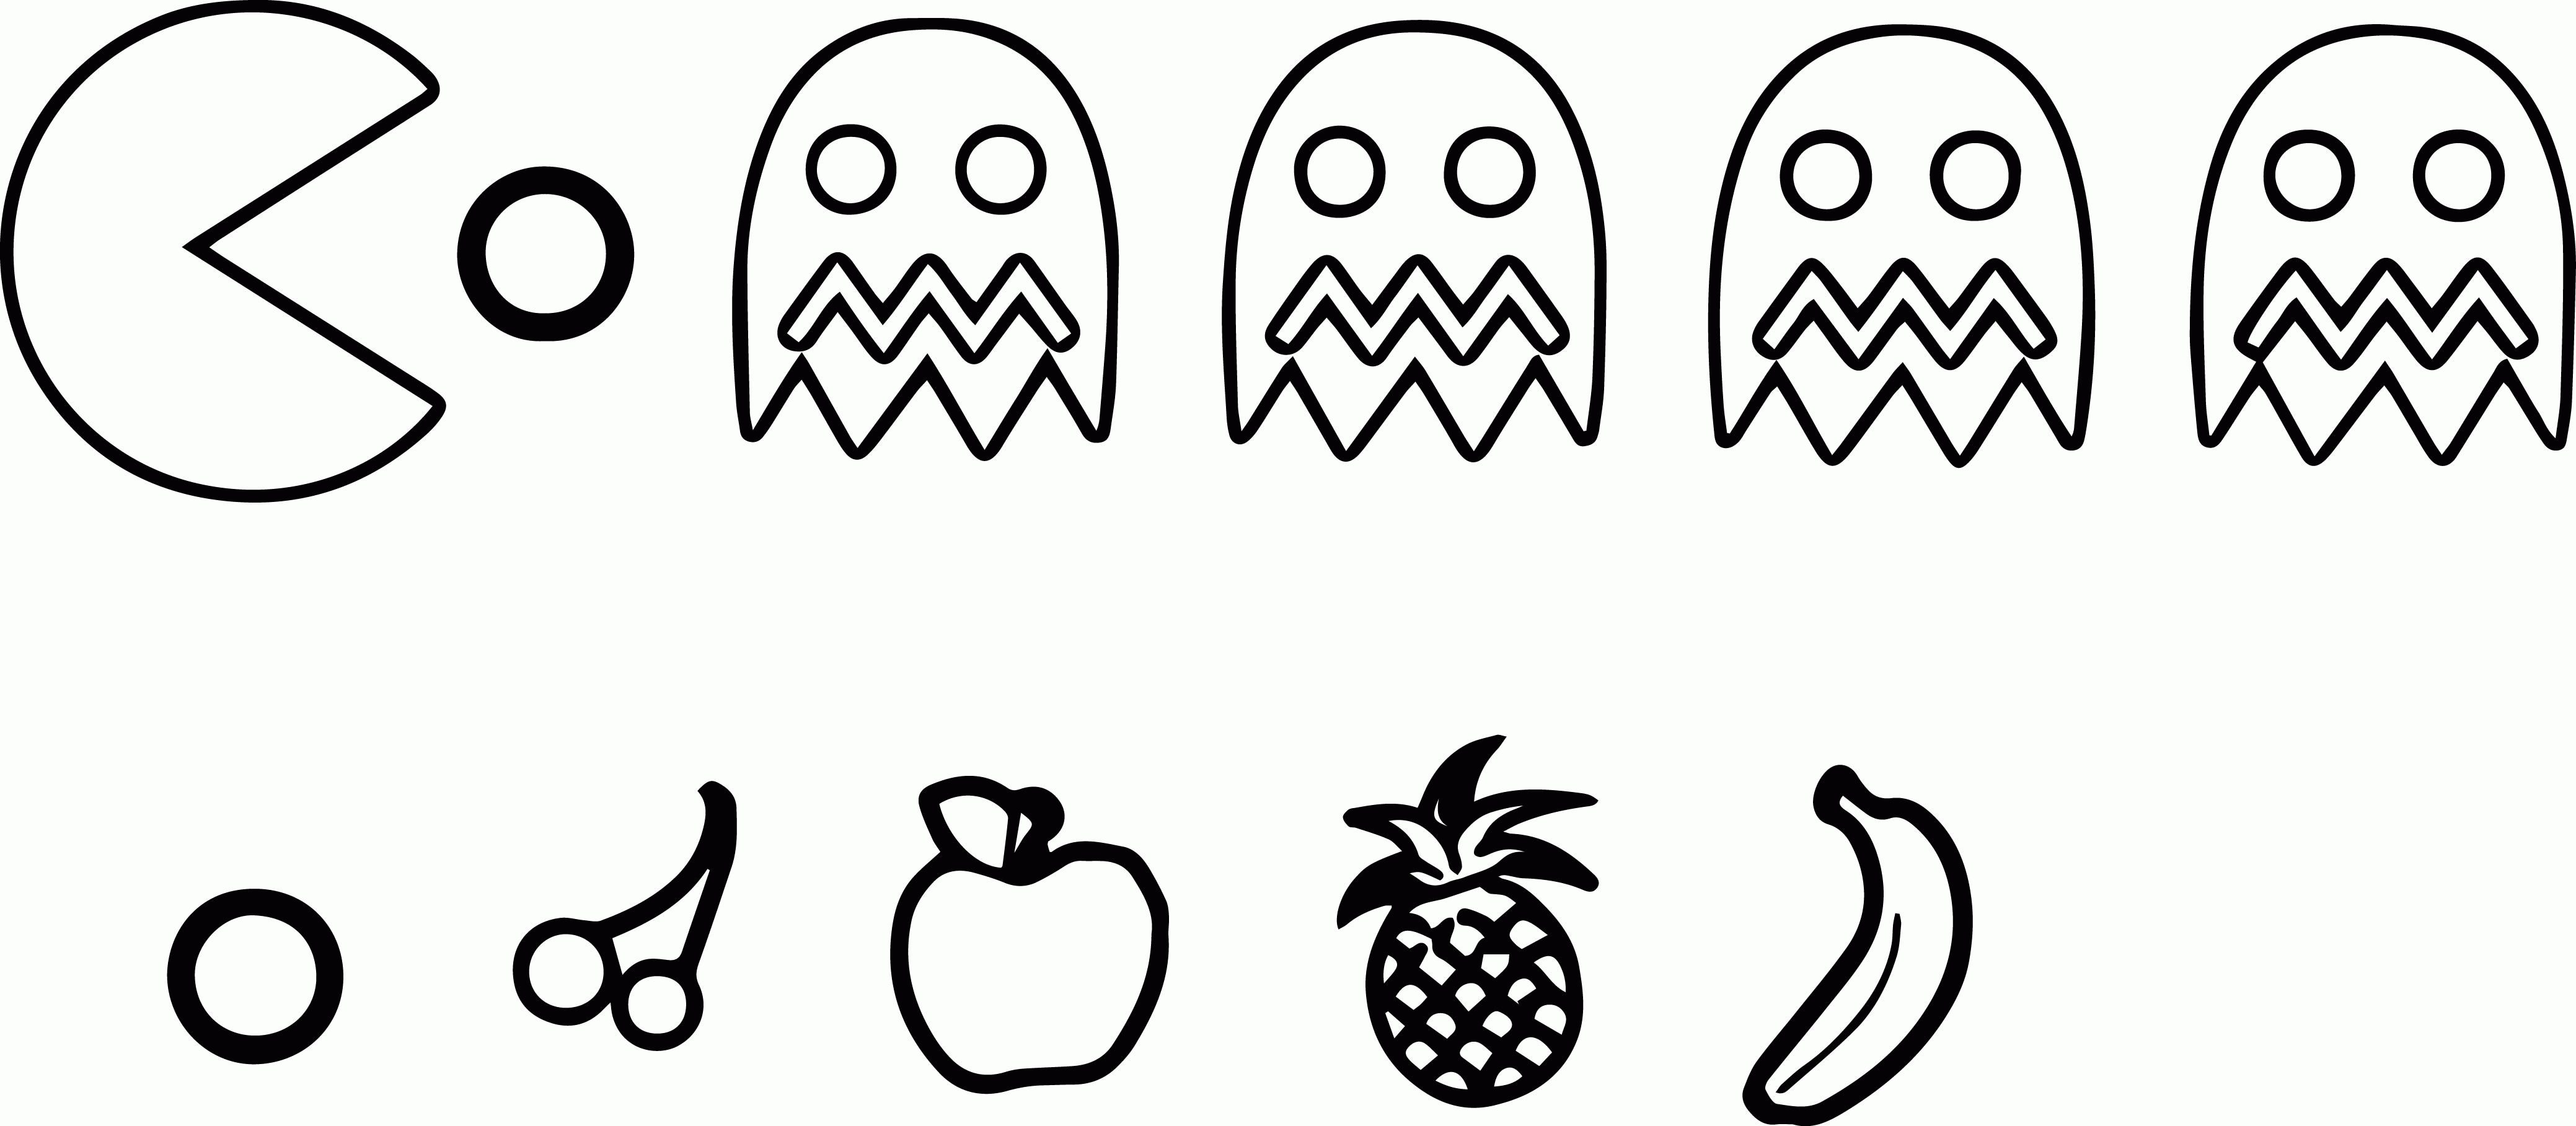 free-pacman-coloring-pages-to-print-download-free-pacman-coloring-pages-to-print-png-images